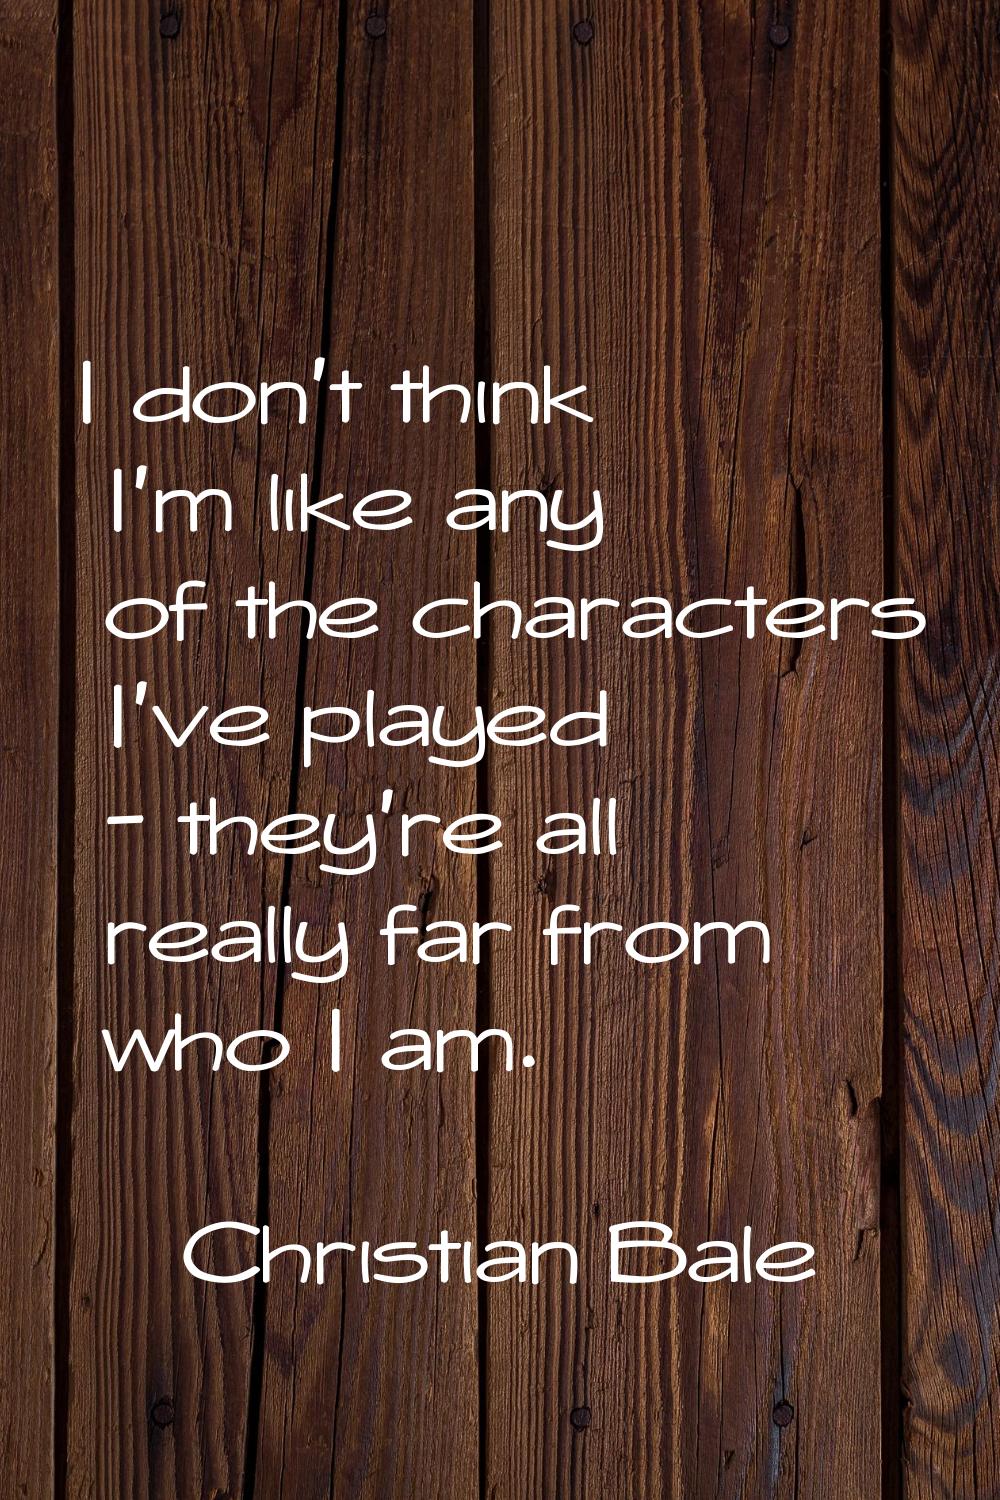 I don't think I'm like any of the characters I've played - they're all really far from who I am.